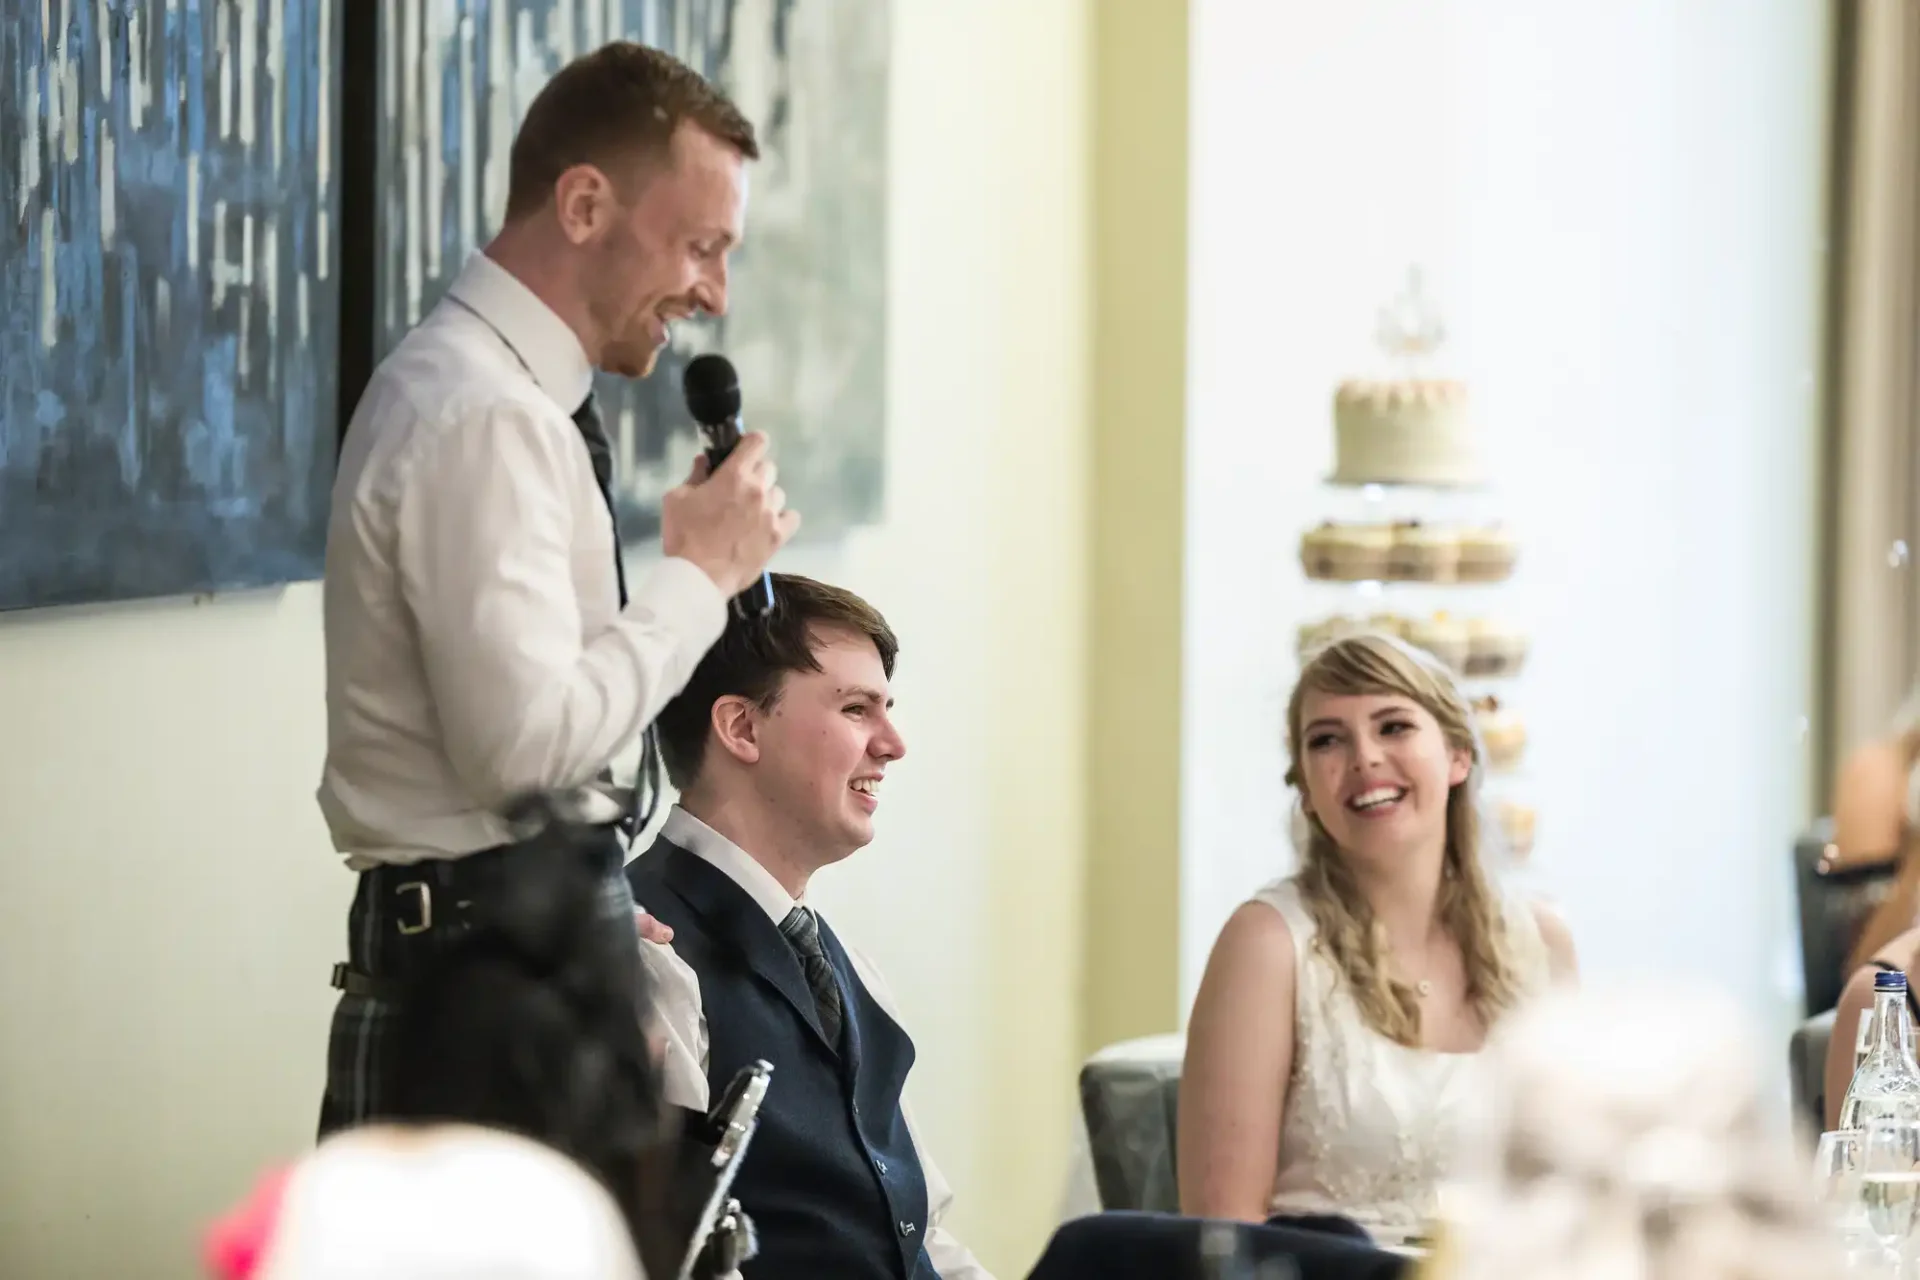 A man speaking into a microphone at a wedding reception, standing beside a seated bride and groom who are smiling.